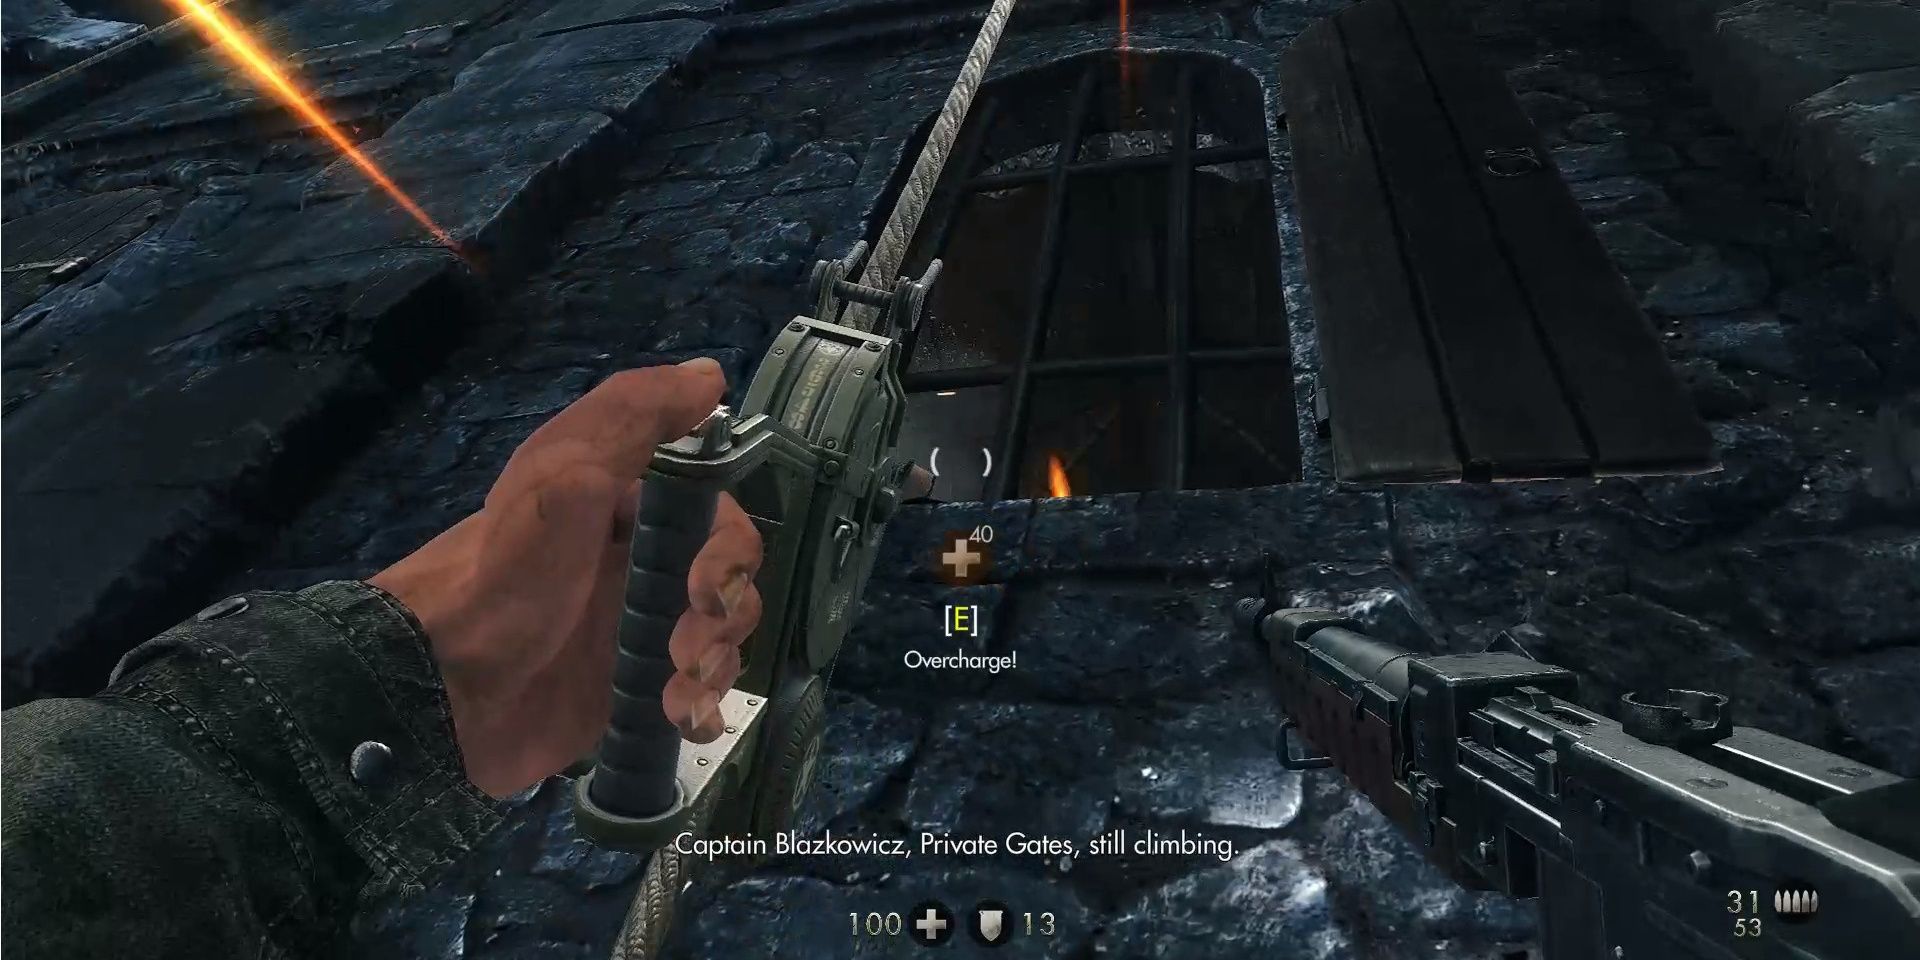 Image of Blazkowicz scaling a building wall in Wolfenstein: The New Order.